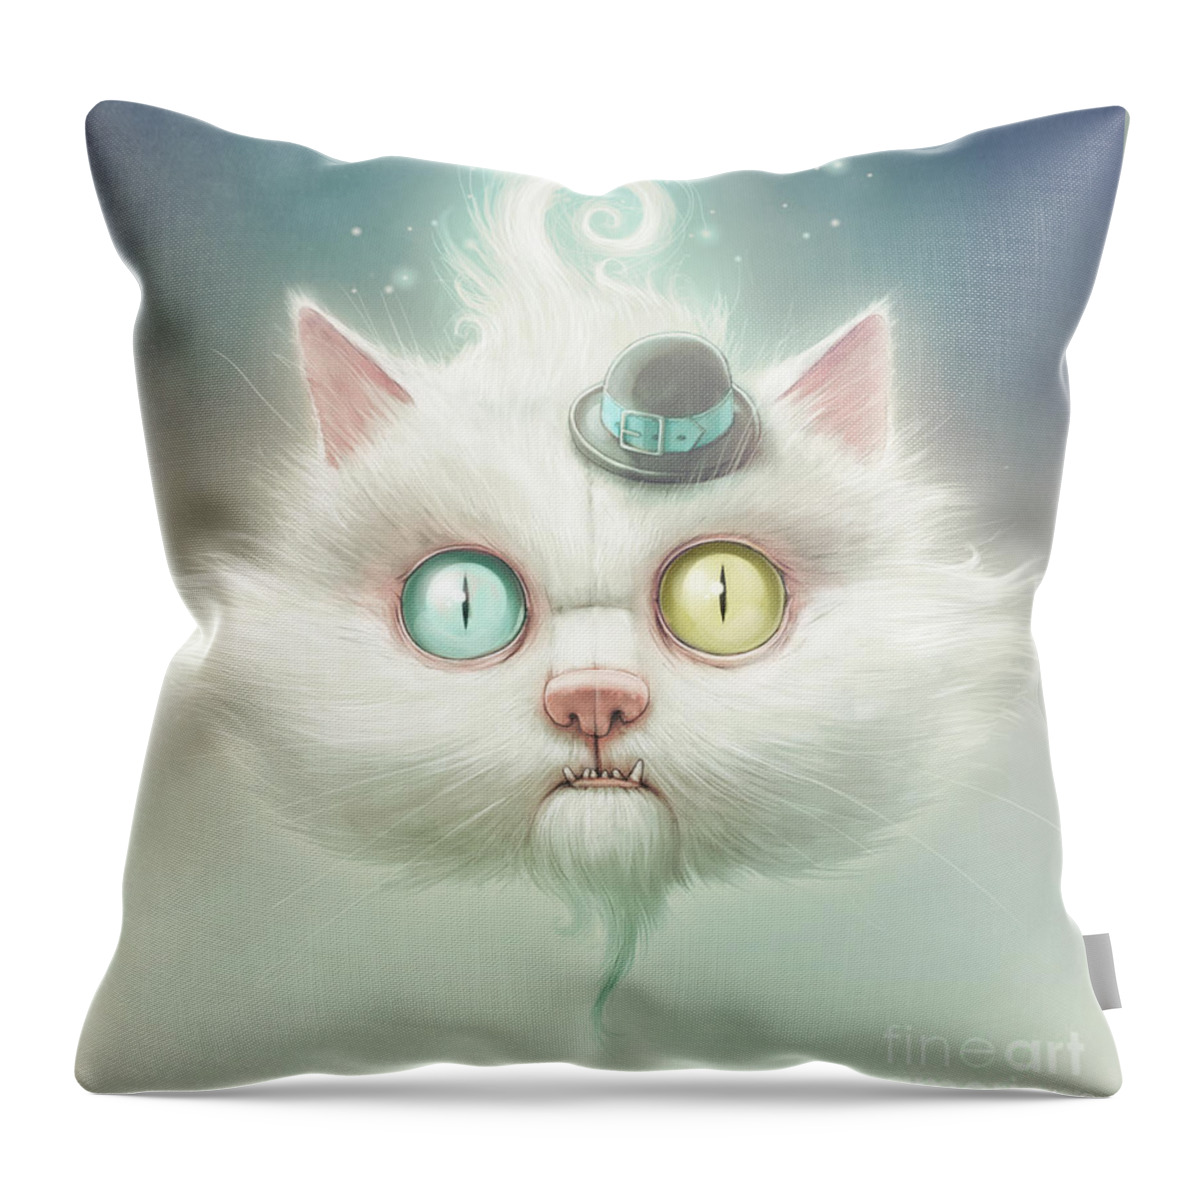 Kitty Throw Pillow featuring the painting Odd Kitty by Lukas Brezak